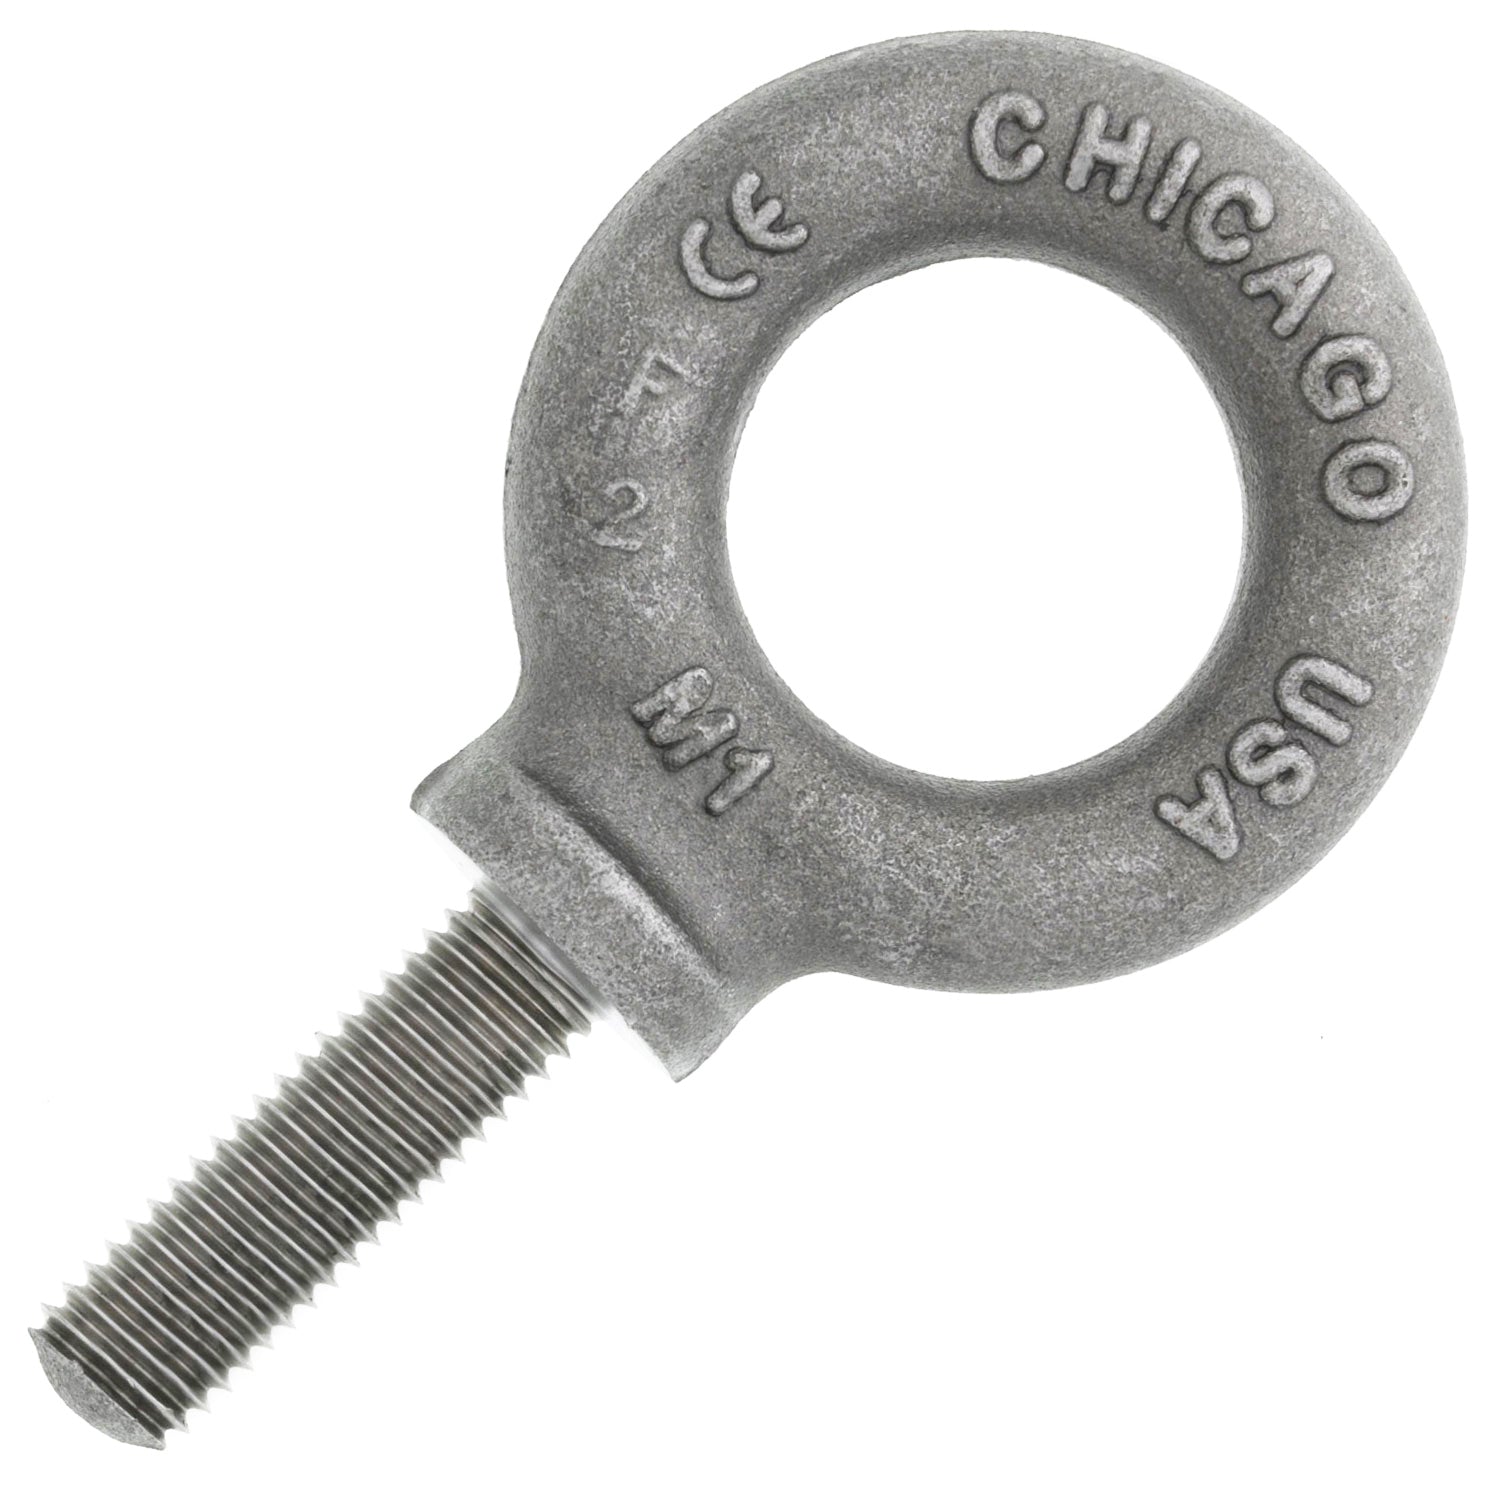 M14 Chicago Hardware Self Colored Metric Machinery Eye Bolt